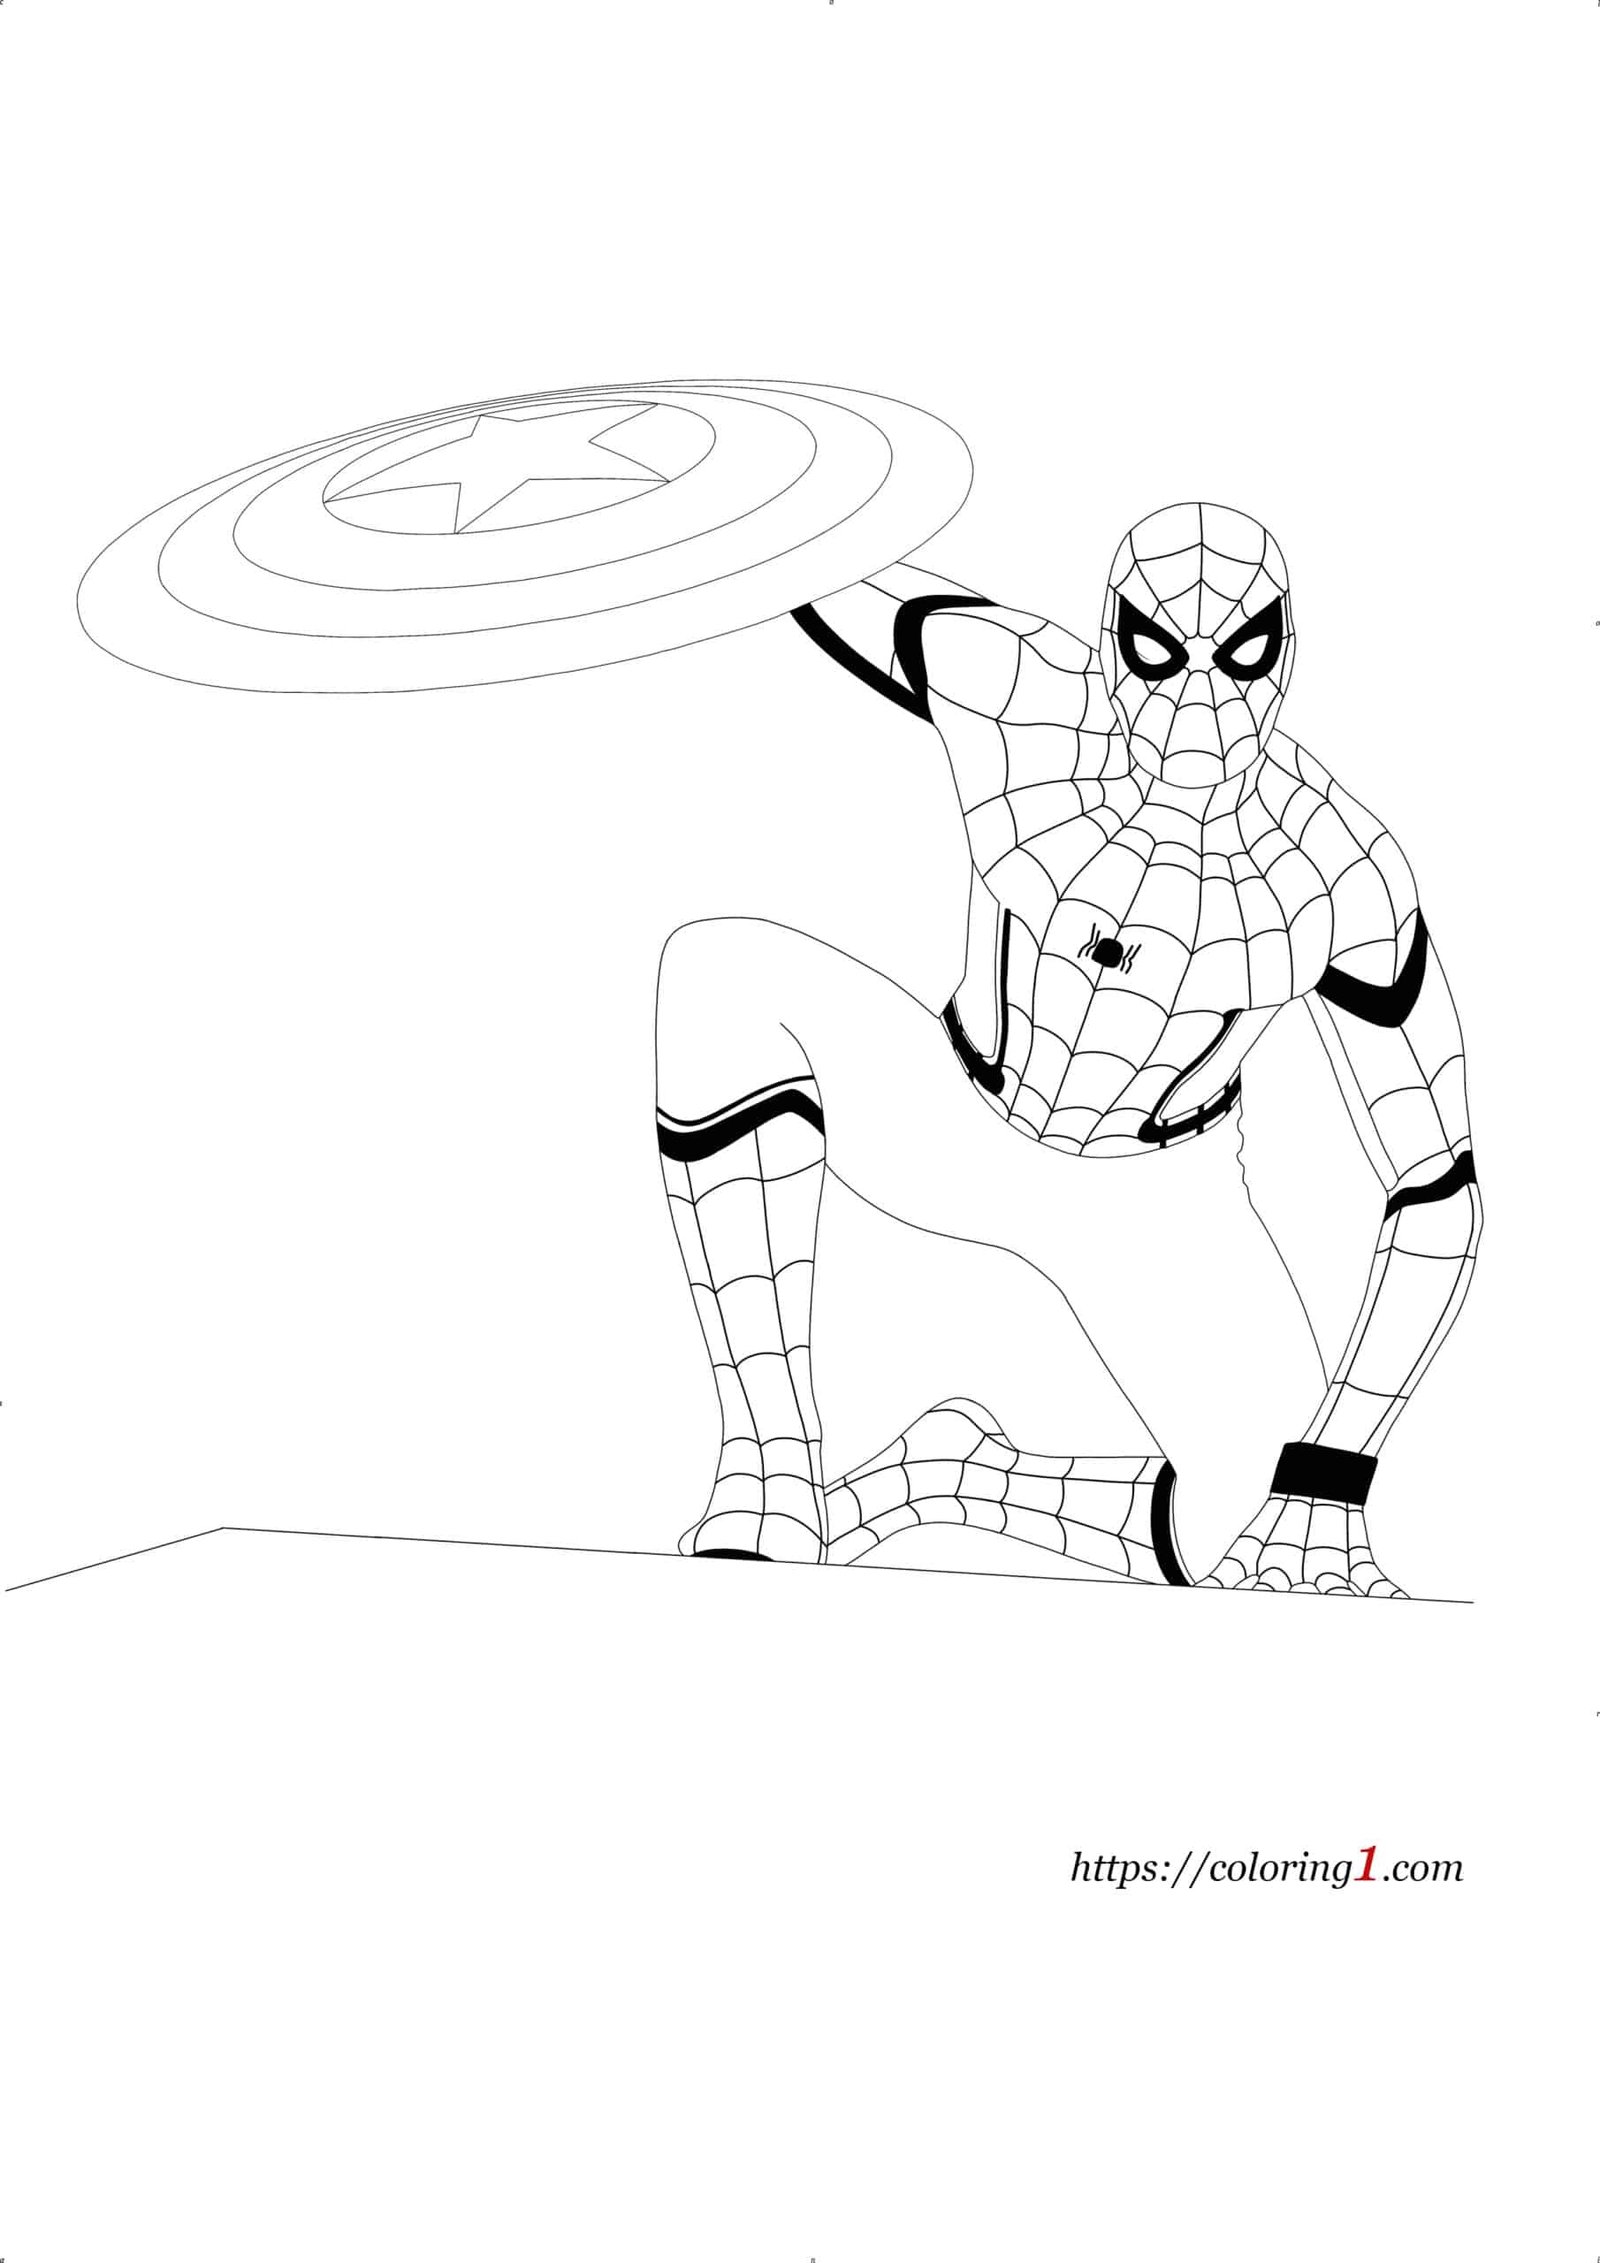 Spiderman with Captain America's Shield coloring page